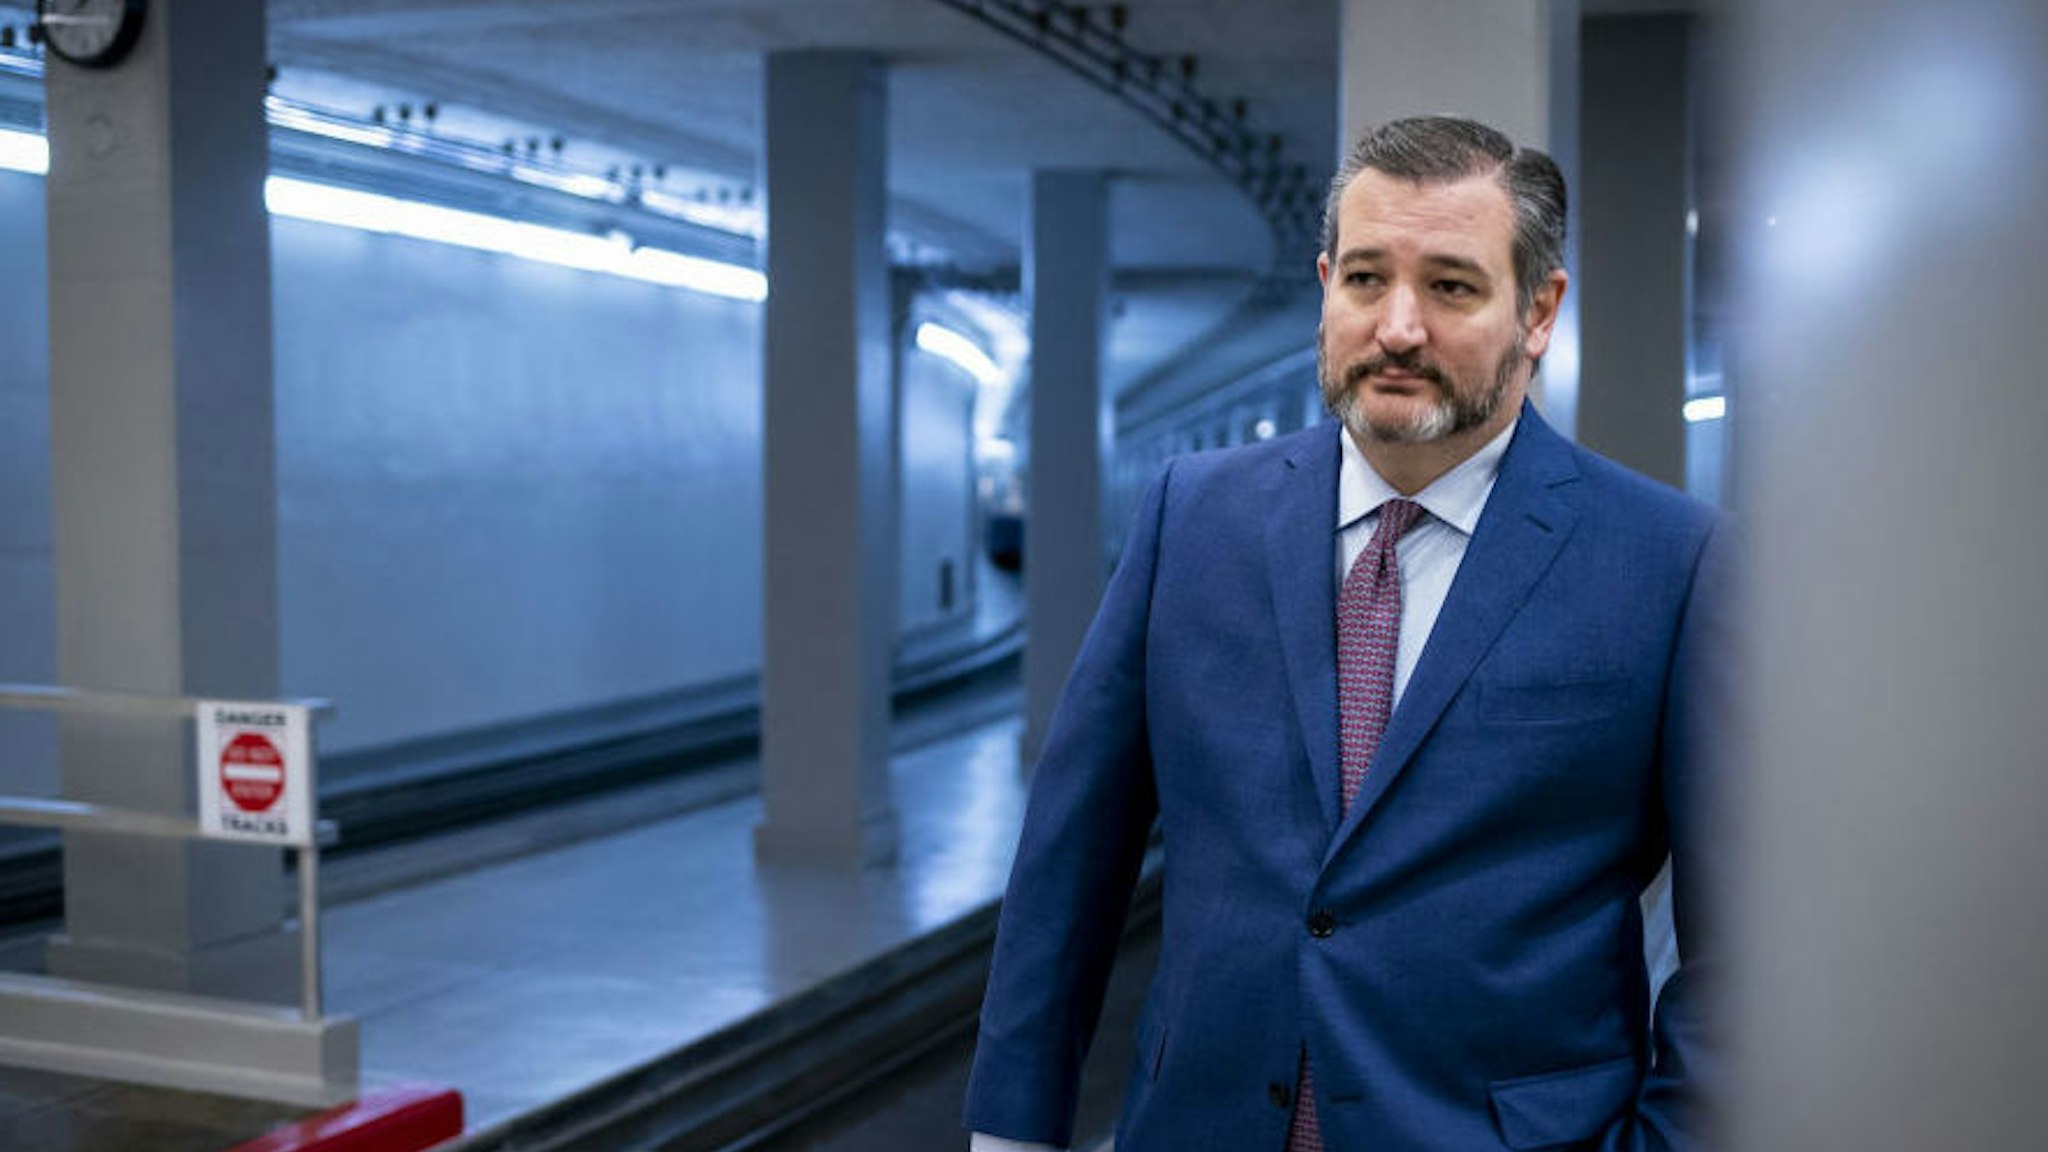 Senator Ted Cruz, a Republican from Texas, arrives for a vote in the Senate Subway of the U.S. Capitol in Washington, D.C., U.S., on Monday, March 23, 2020. Senate Democrats again refused to advance Mitch McConnell's $2 trillion stimulus plan Monday as the coronavirus continued spreading amid dire predictions of a deep economic recession. Photographer: Al Drago/Bloomberg